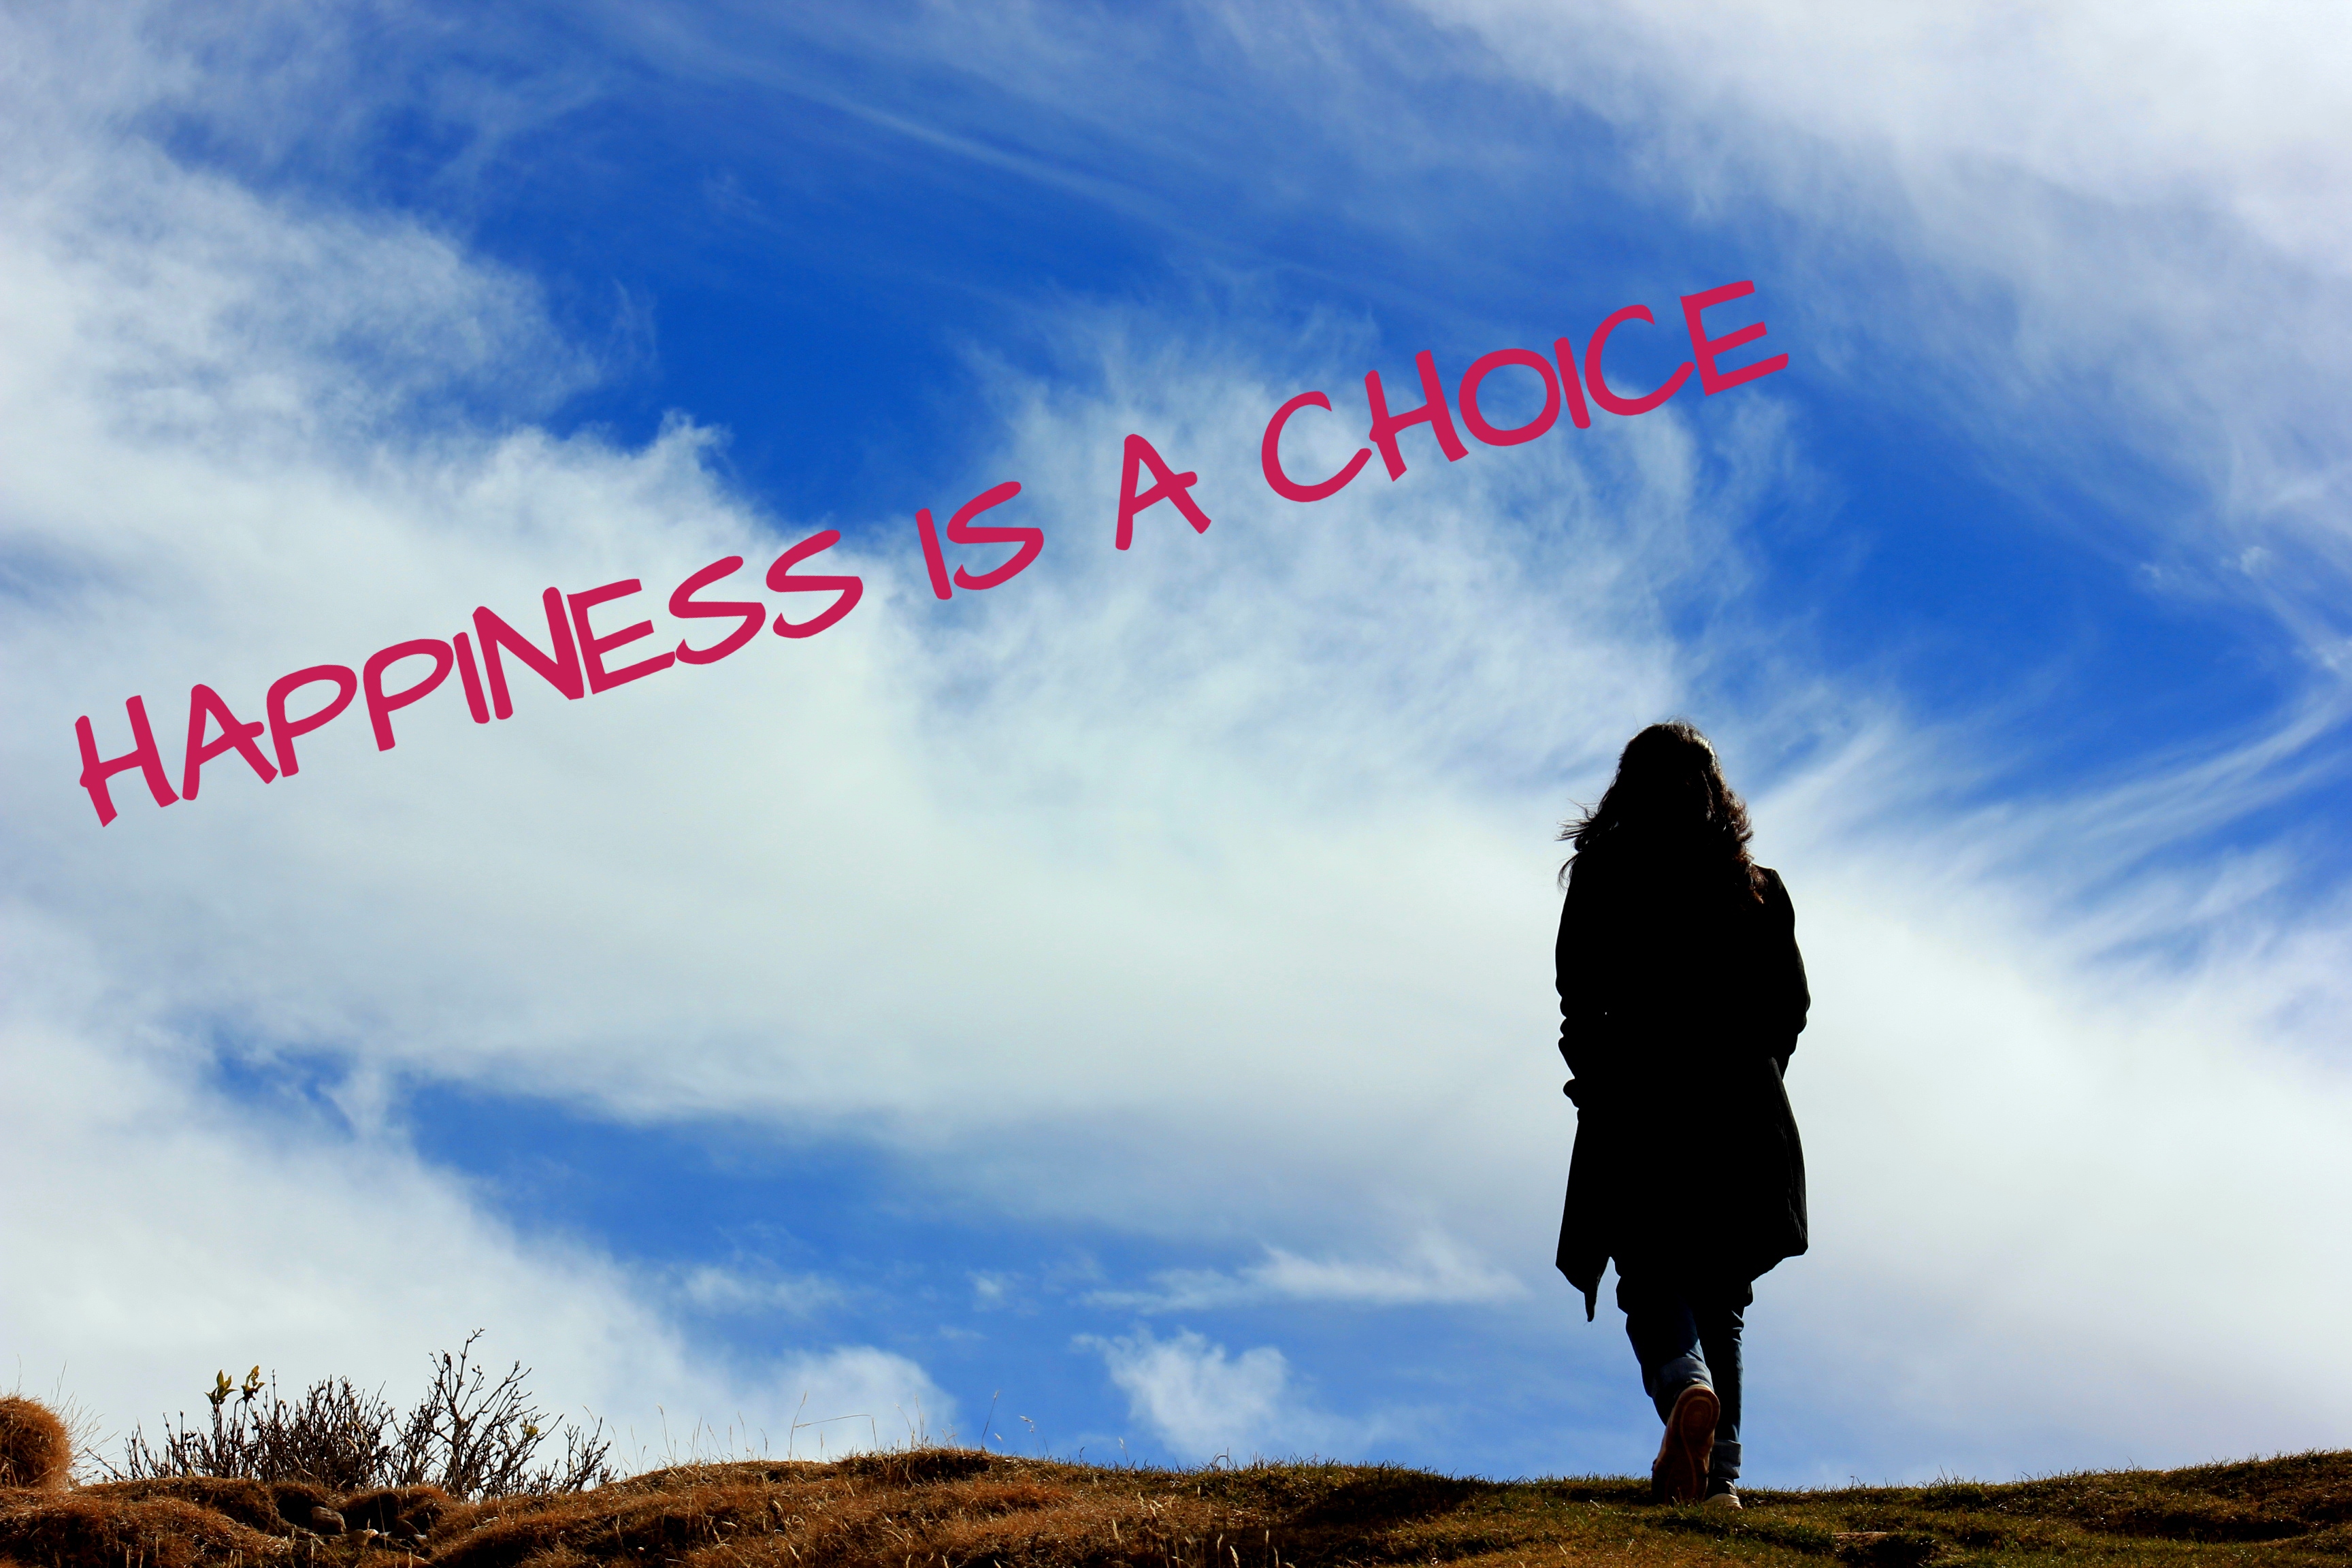 Most of the people want to know that how to stay happy? I would say "Happiness is a choice."